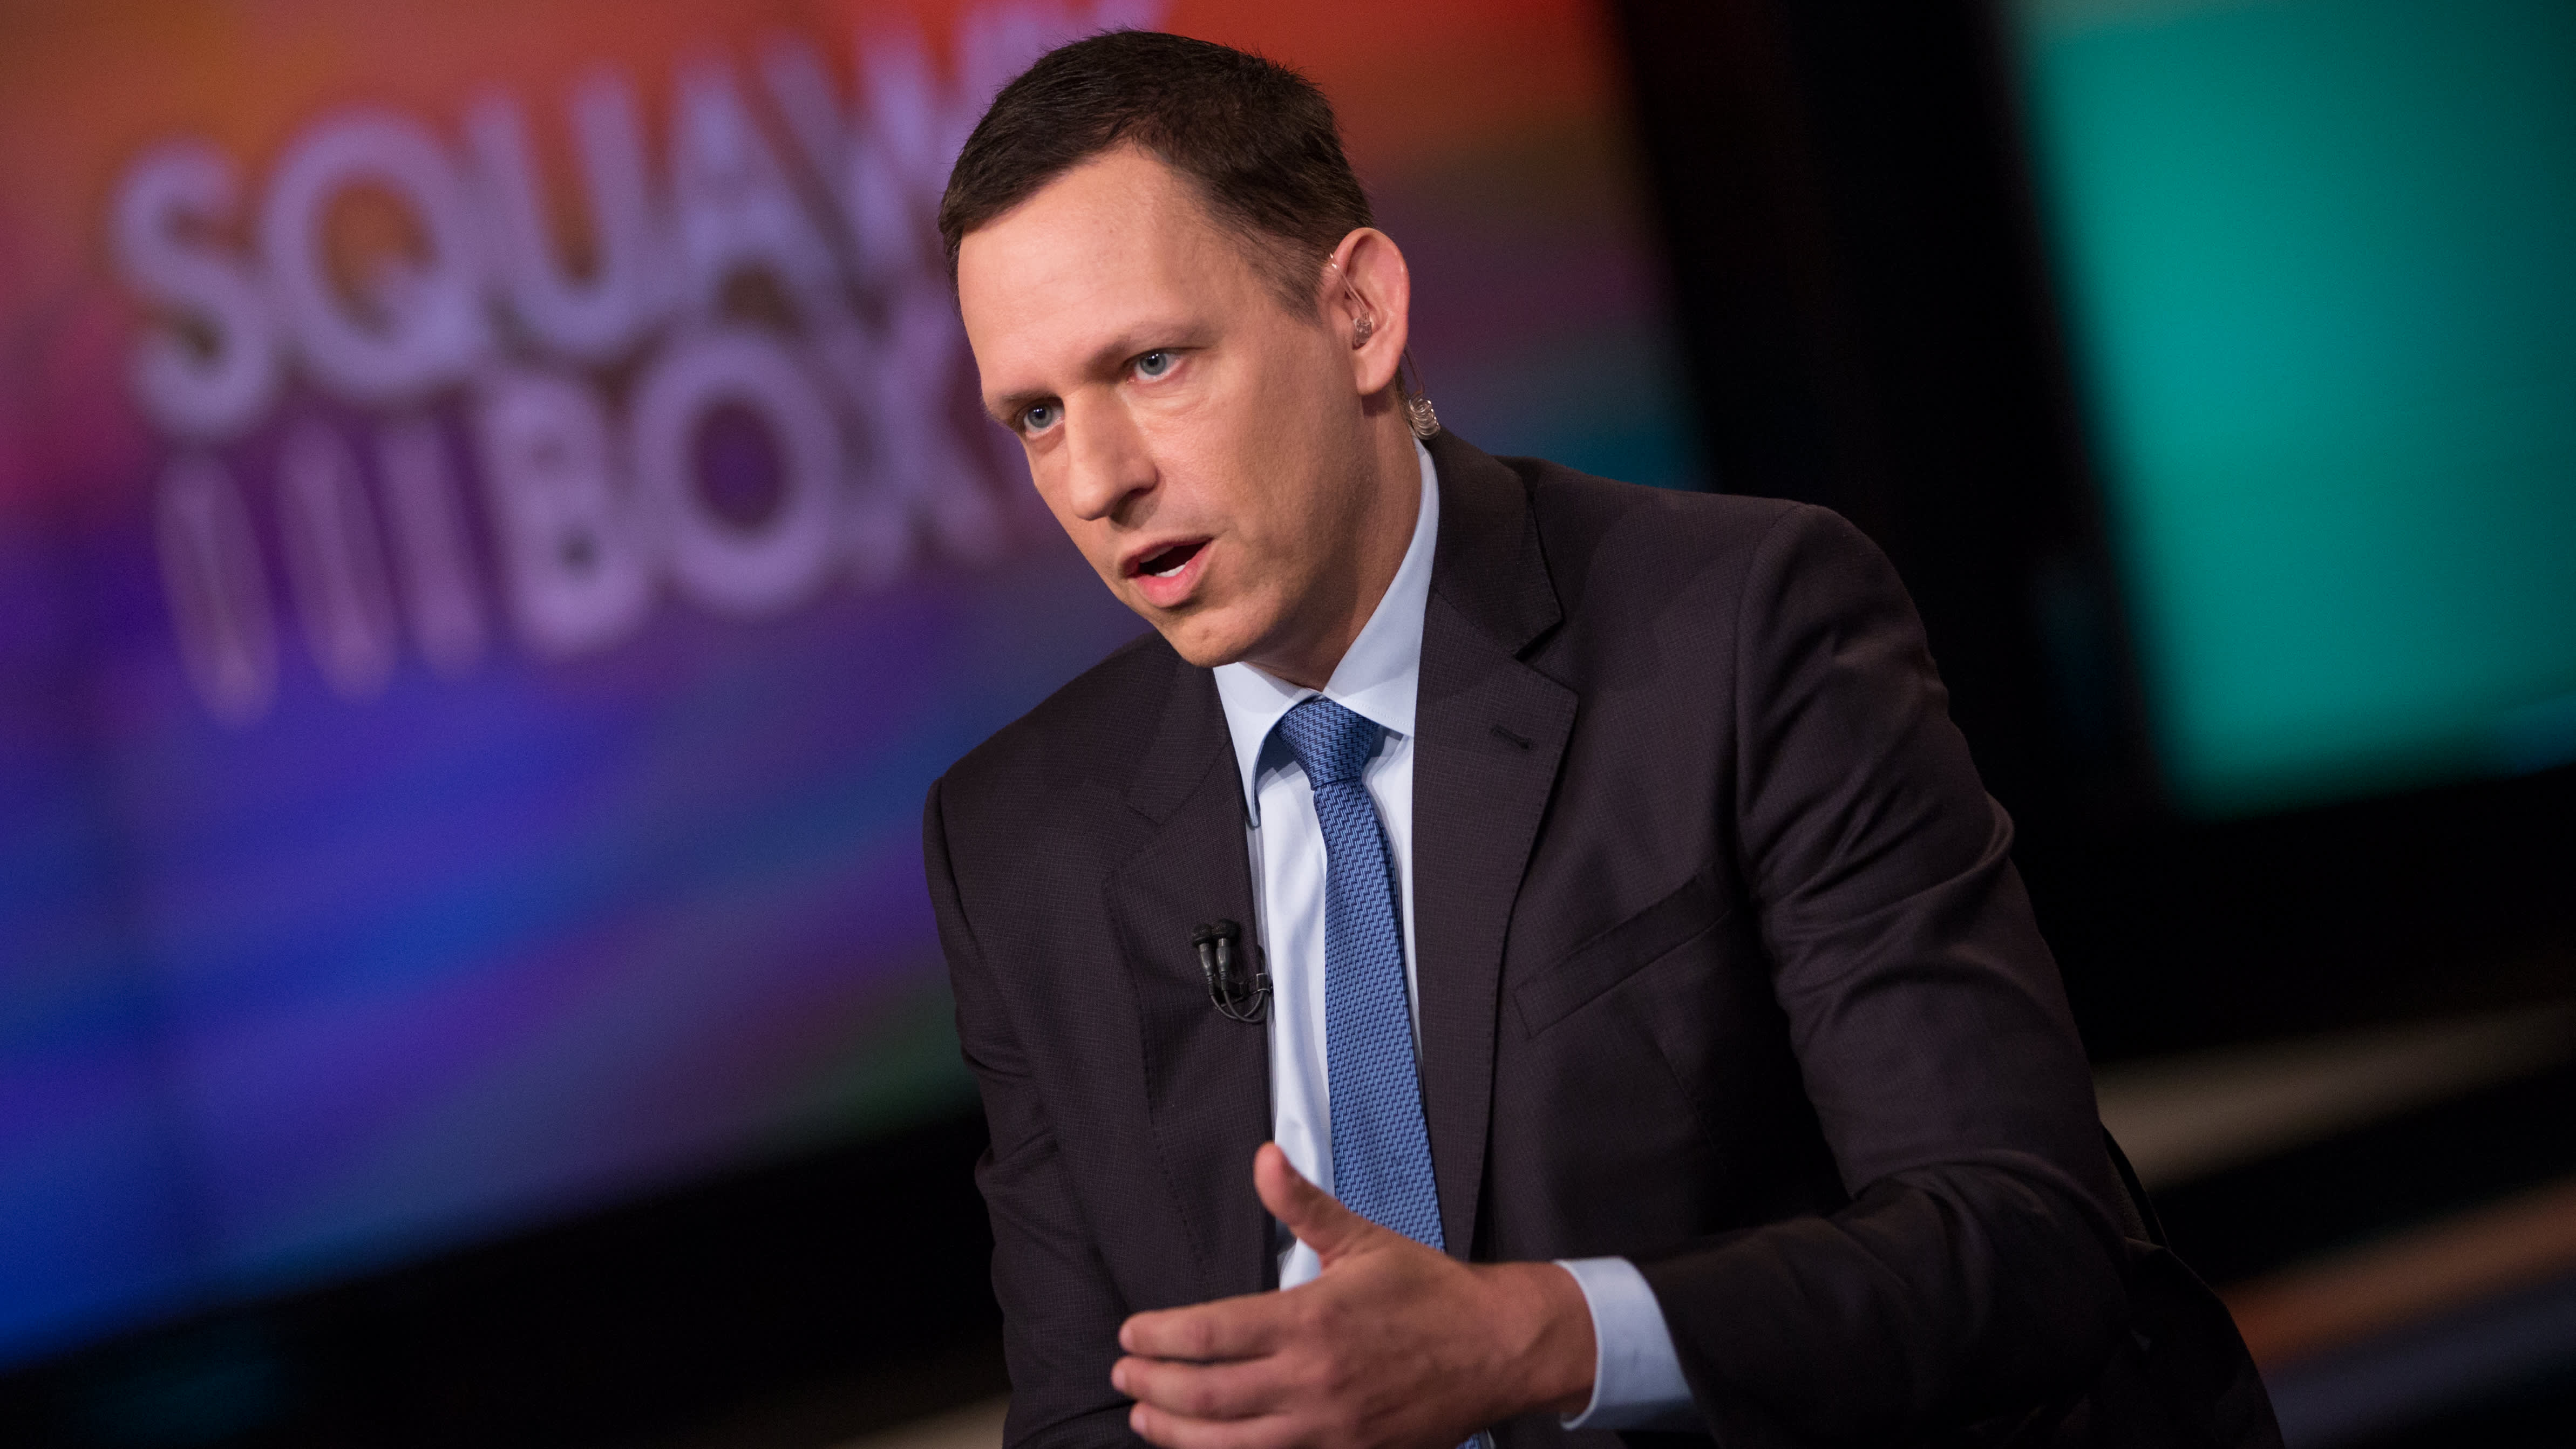 Peter Thiel thought about the election like a venture capitalist—commentary